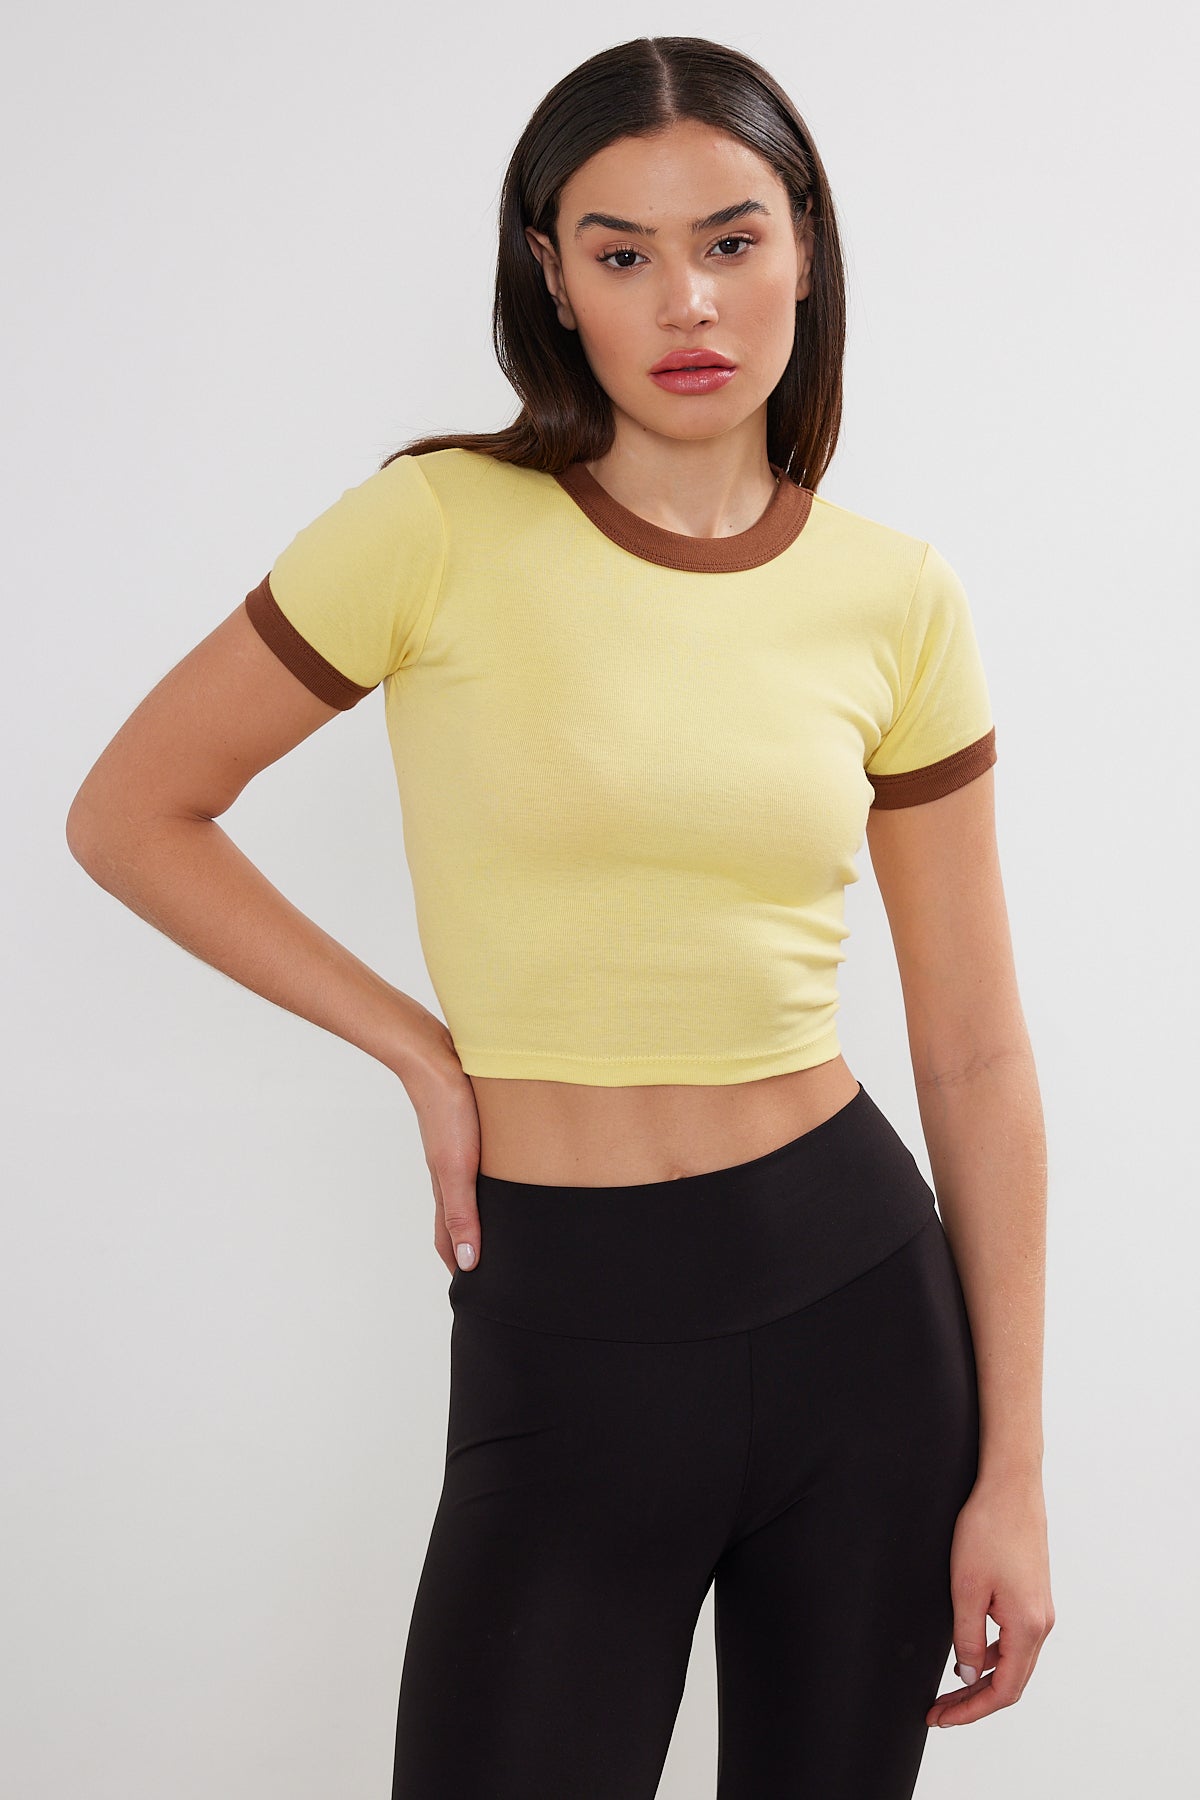 Custom Blank Crop Top Two Tone Cotton Crop Top S-M-L (2-2-2) 6 PIECES